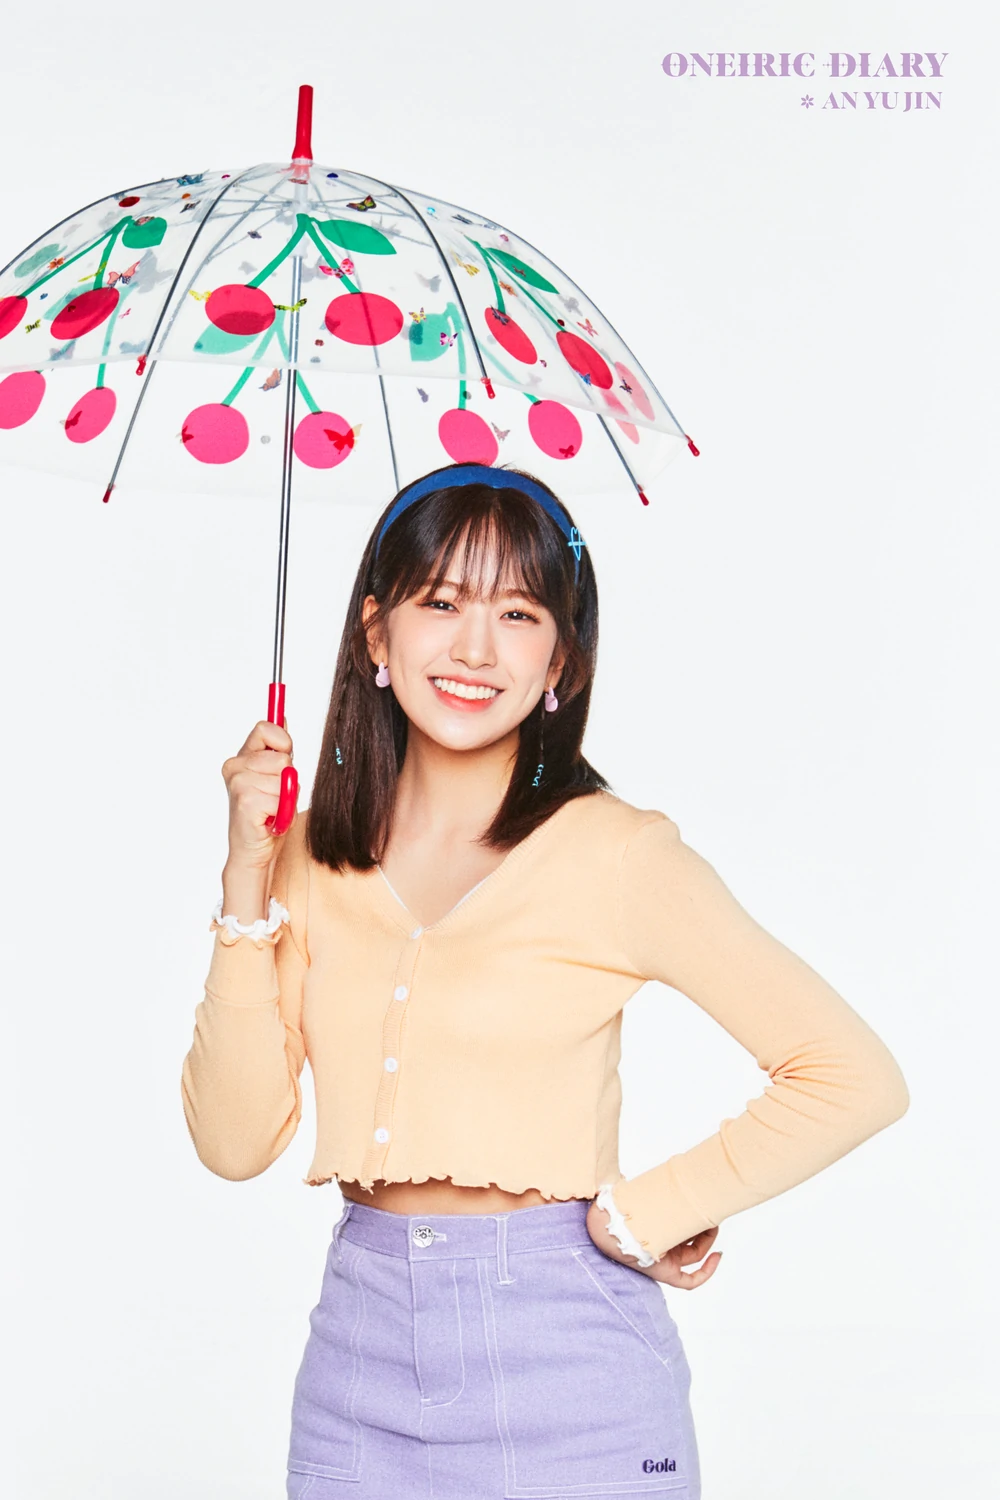 IZ*ONE Oneiric Diary Yujin Concept Teaser Picture Image Photo Kpop K-Concept 1